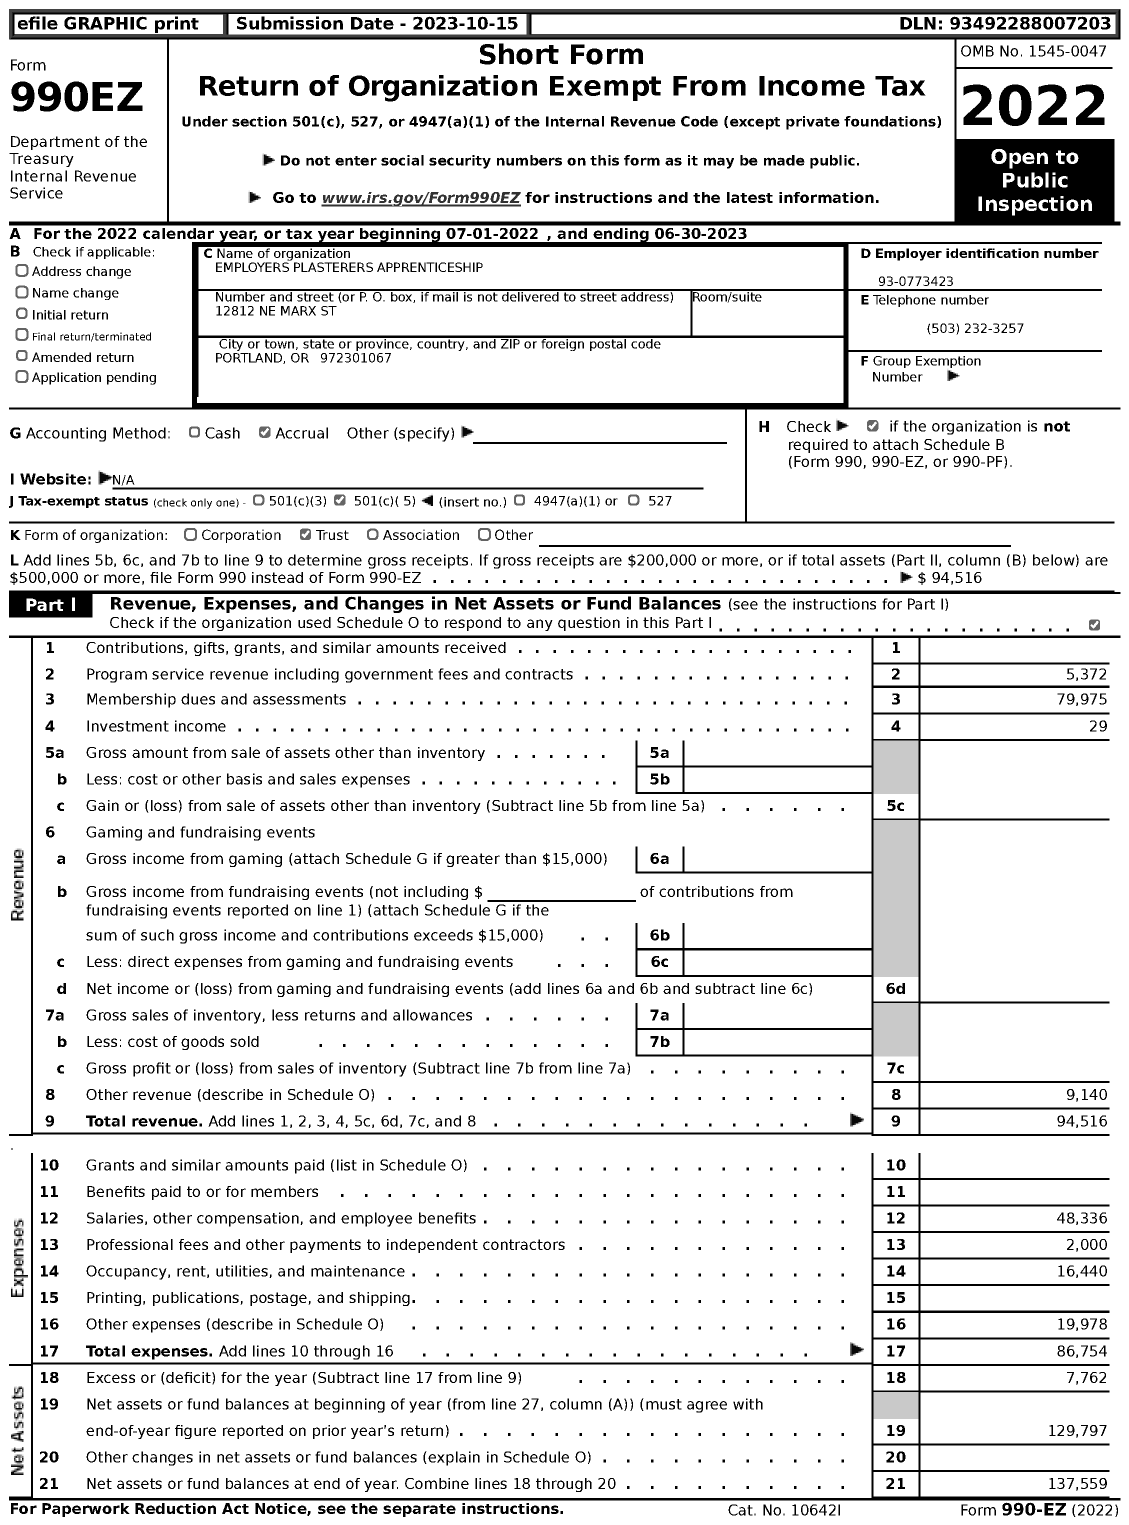 Image of first page of 2022 Form 990EZ for Employers Plasterers Apprenticeship